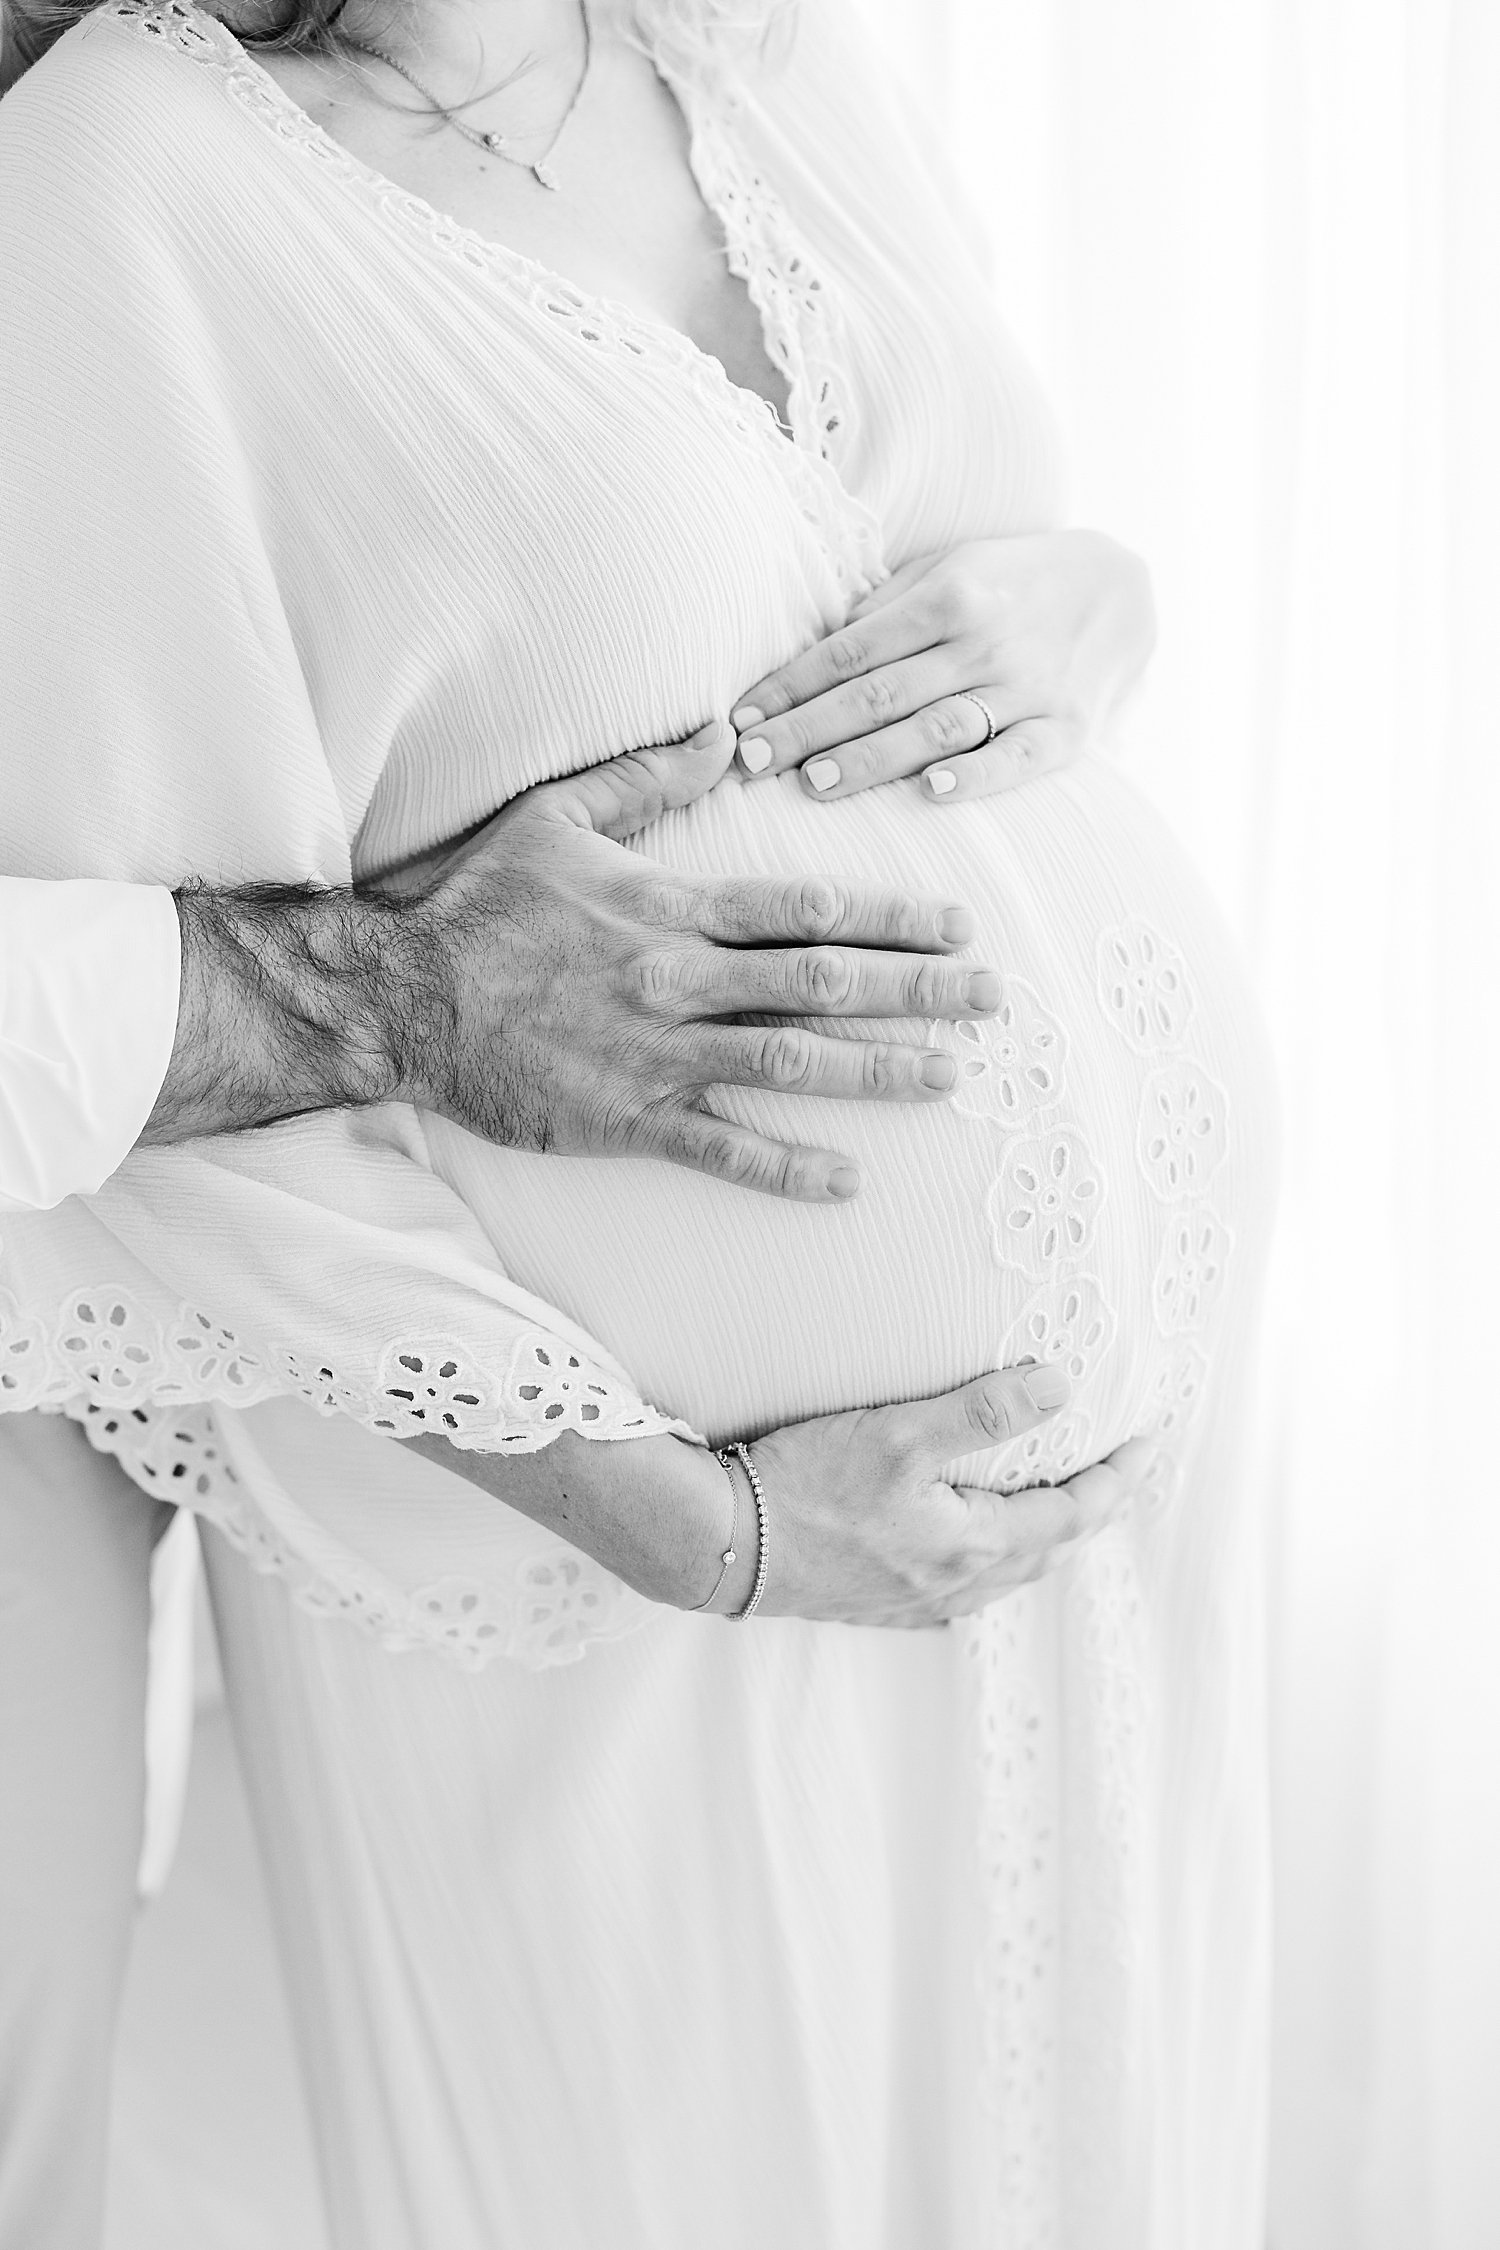 Black and white maternity photos of Mom and Dad | Kristin Wood Photography